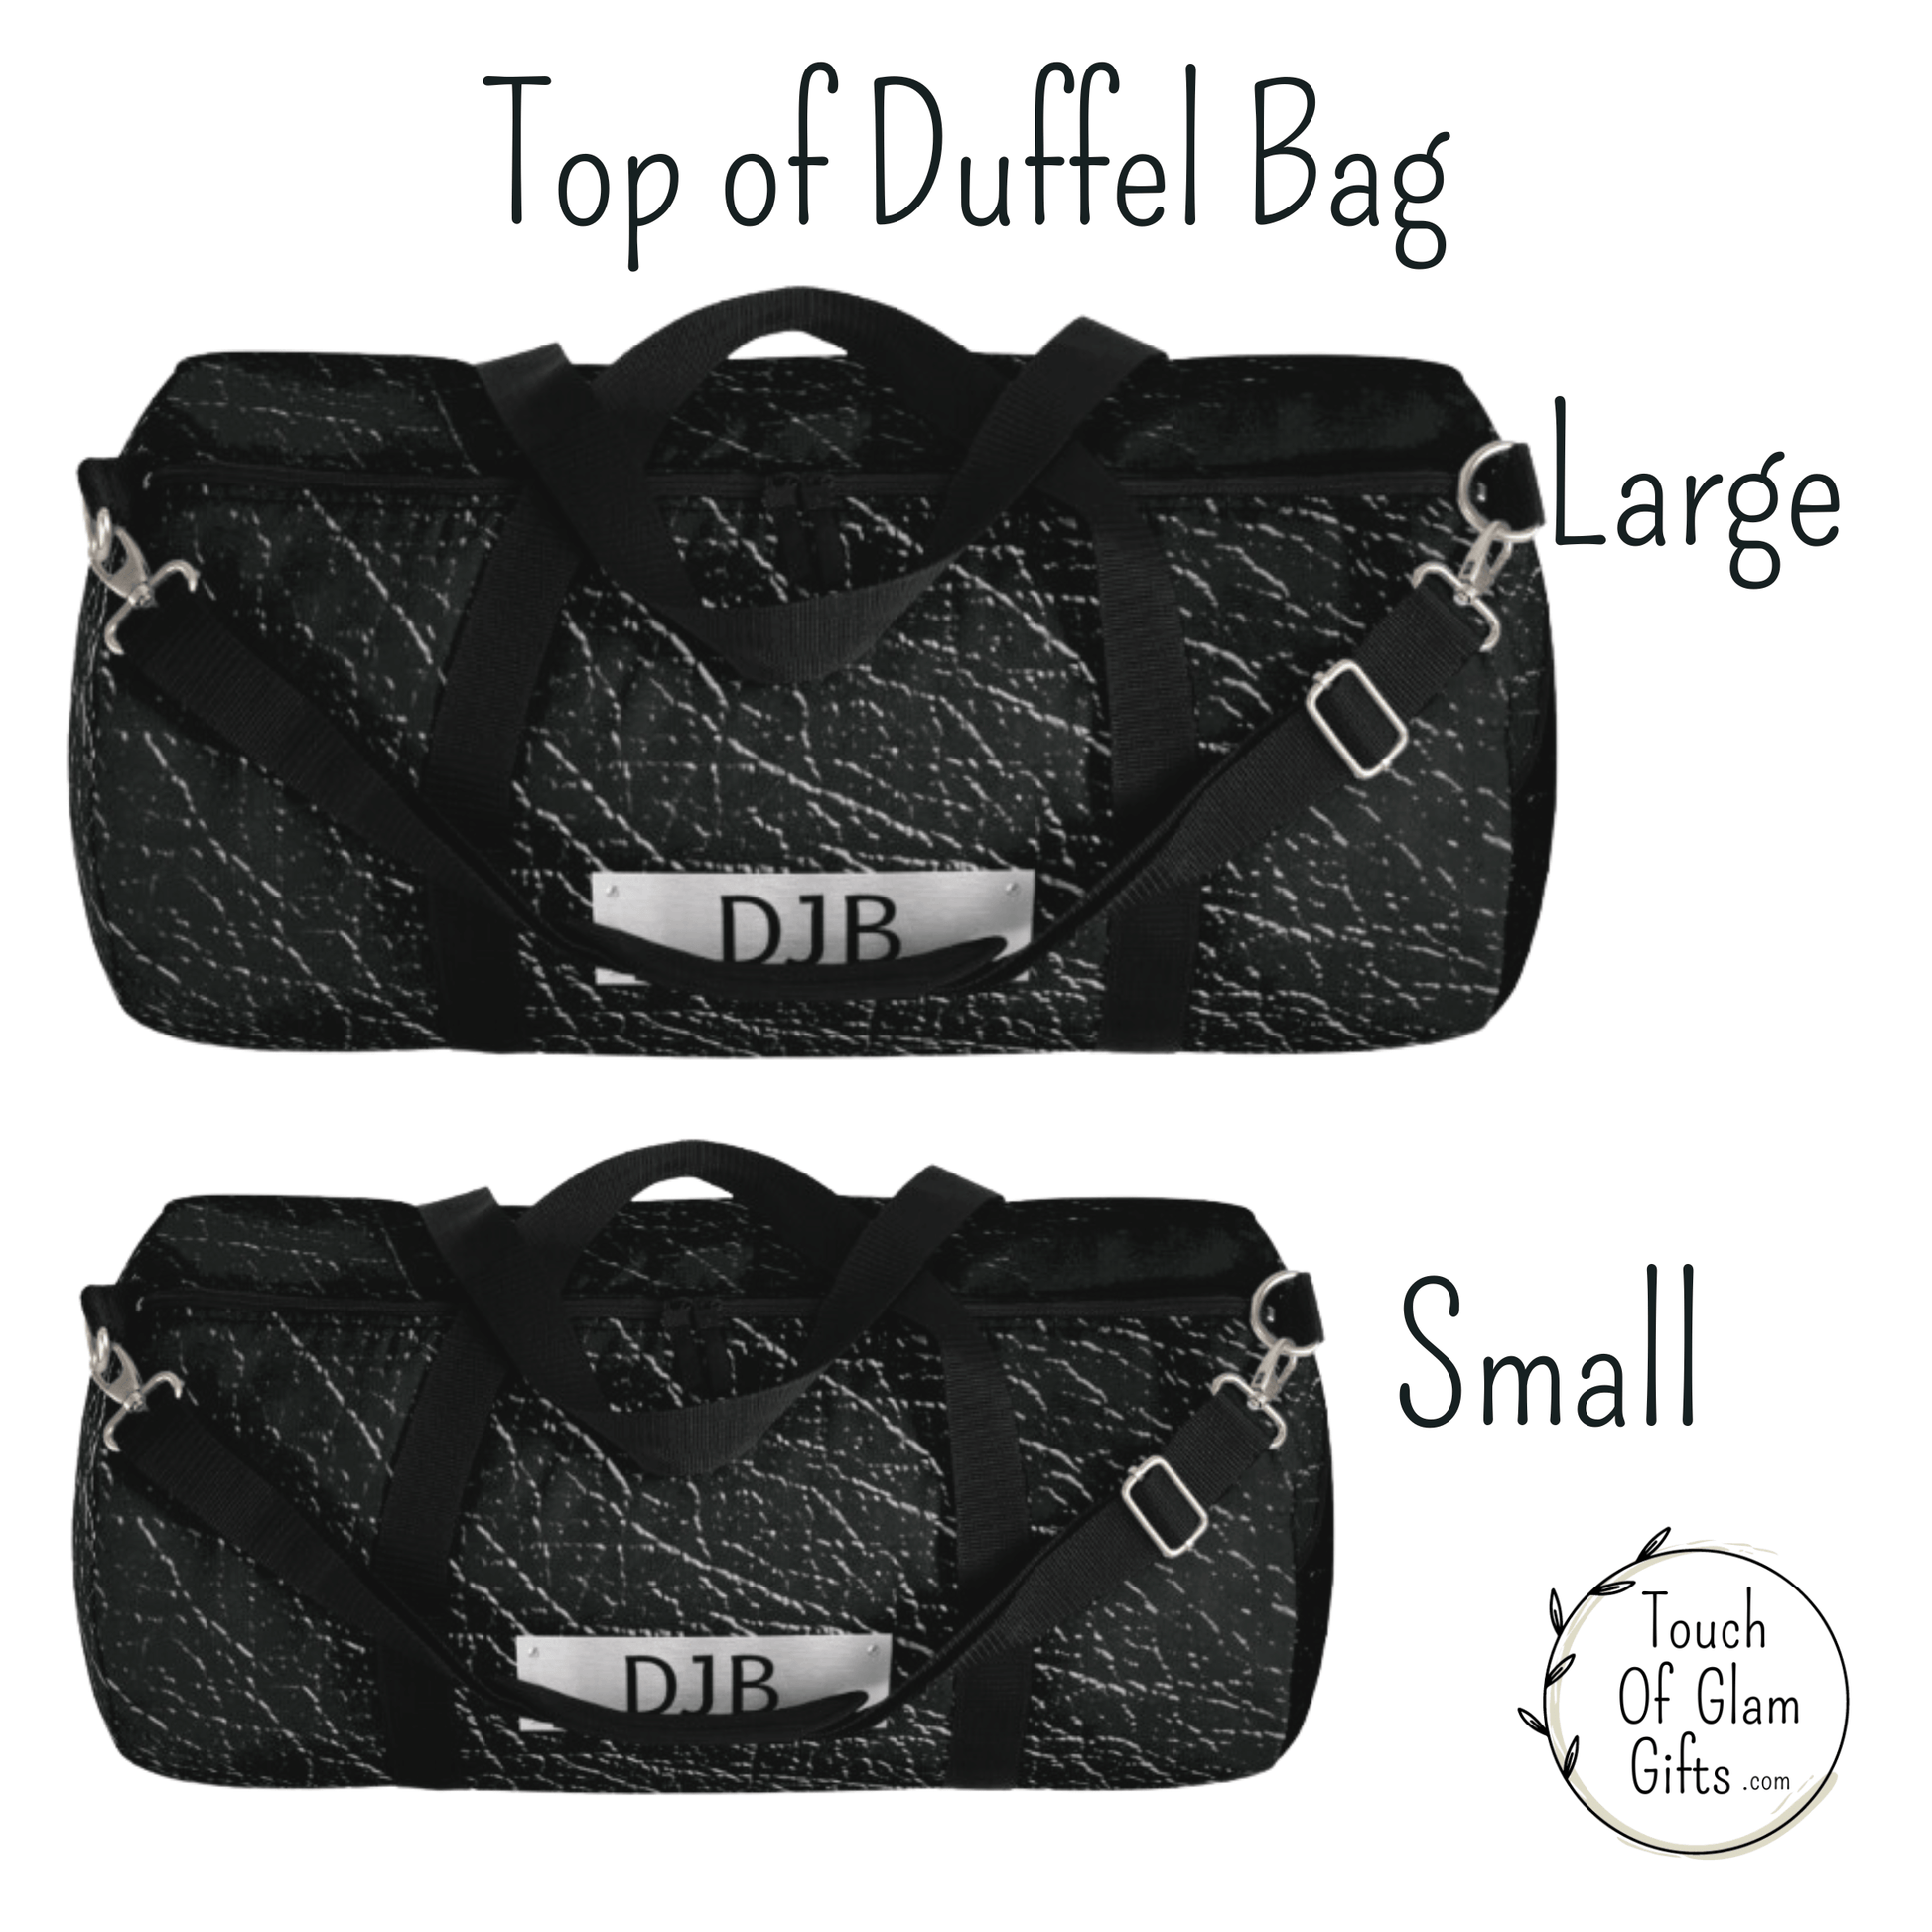 Top of mens black and grey duffel bag shows a sturdy zipper and steel clasps.